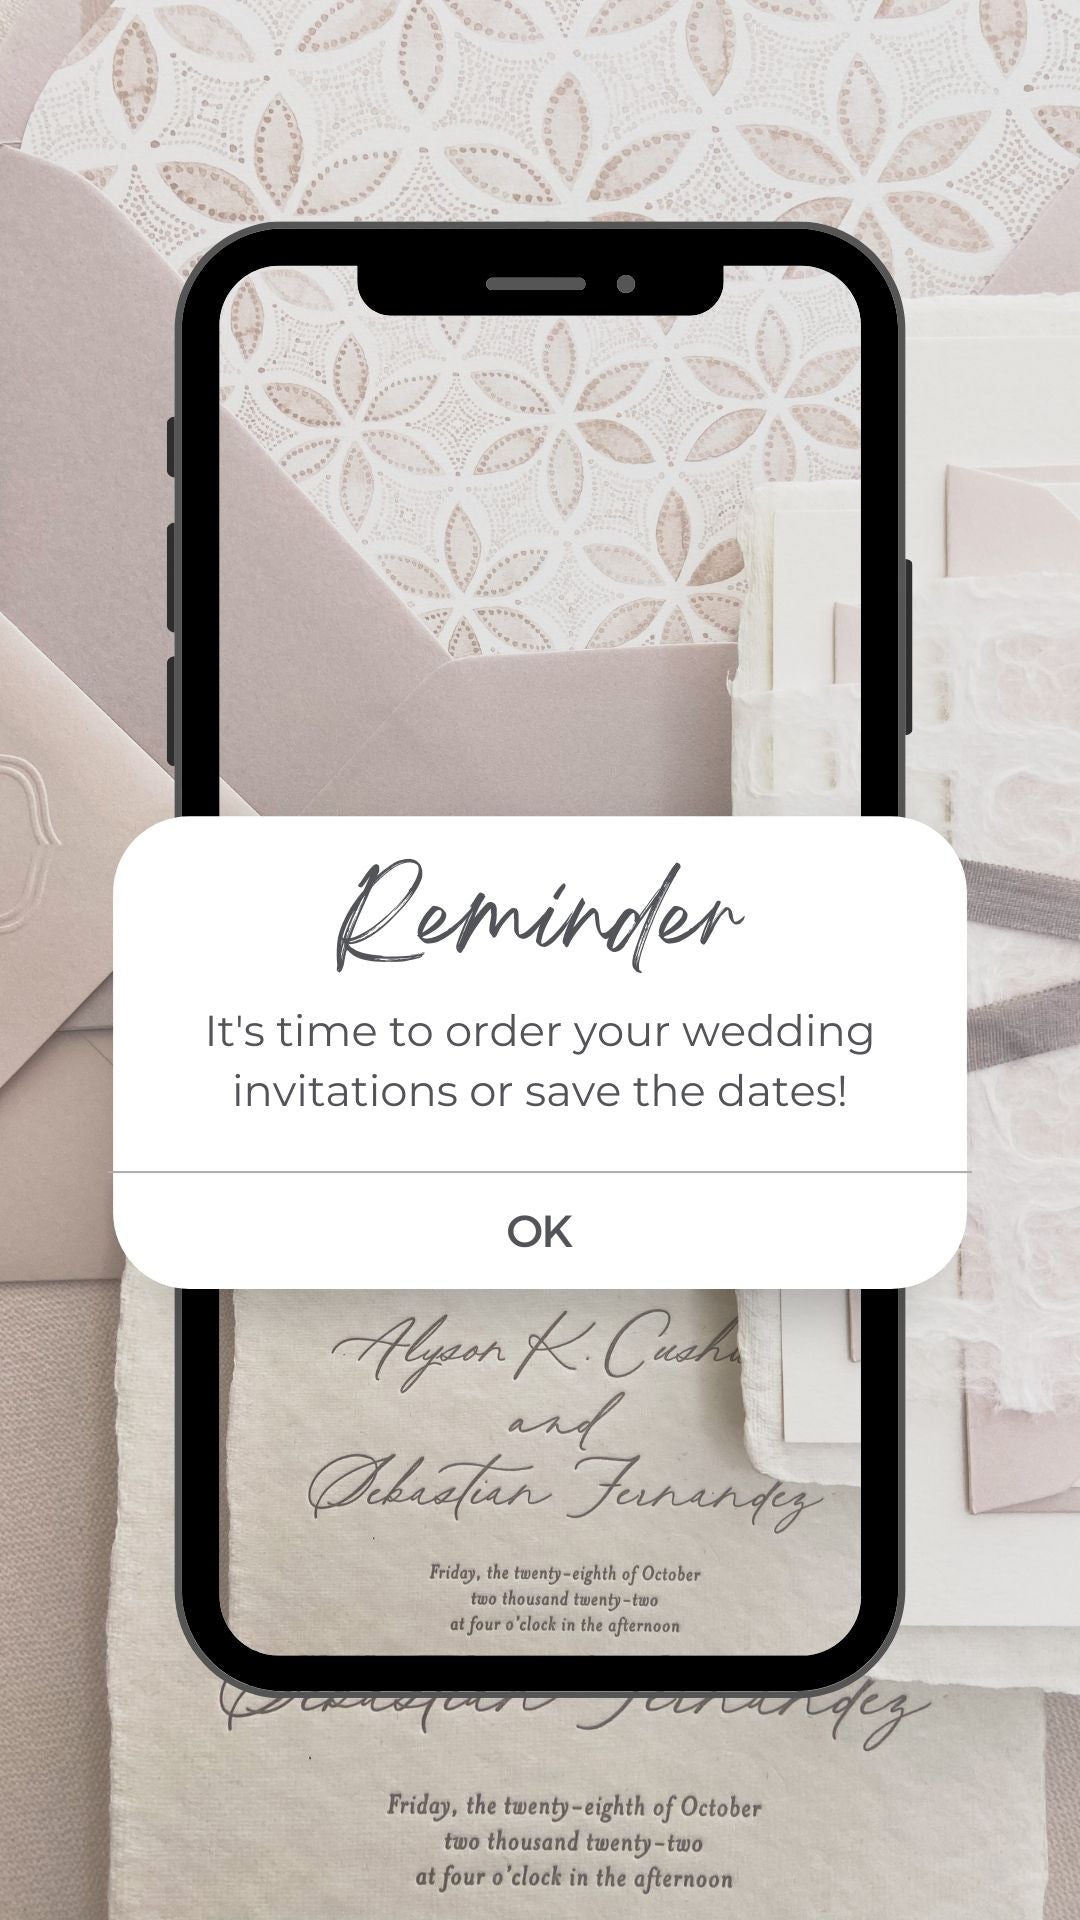 When to Send Save the Dates